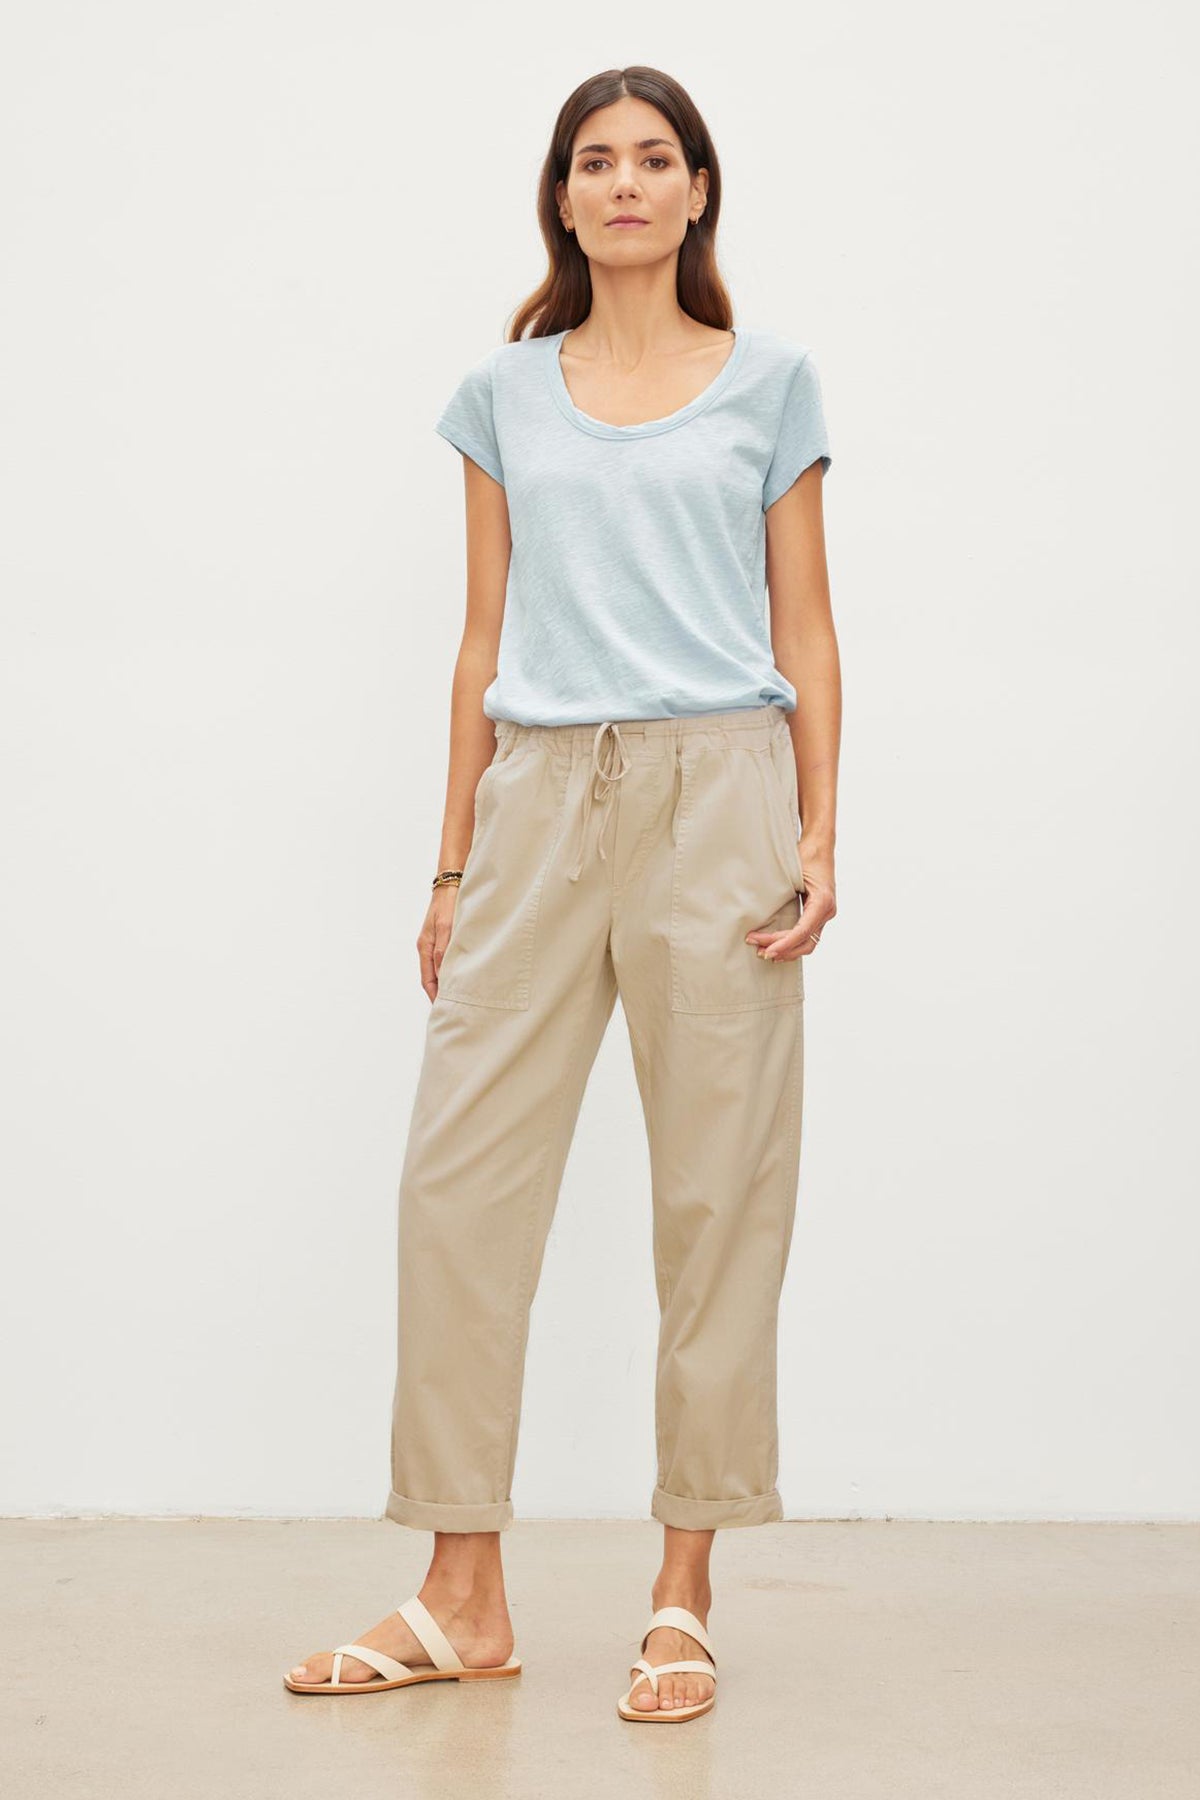   The model is wearing a blue t-shirt and Velvet by Graham & Spencer khaki pants. The MISTY COTTON TWILL PANT has an elastic waist and drawstring, providing comfort and adjustability. 